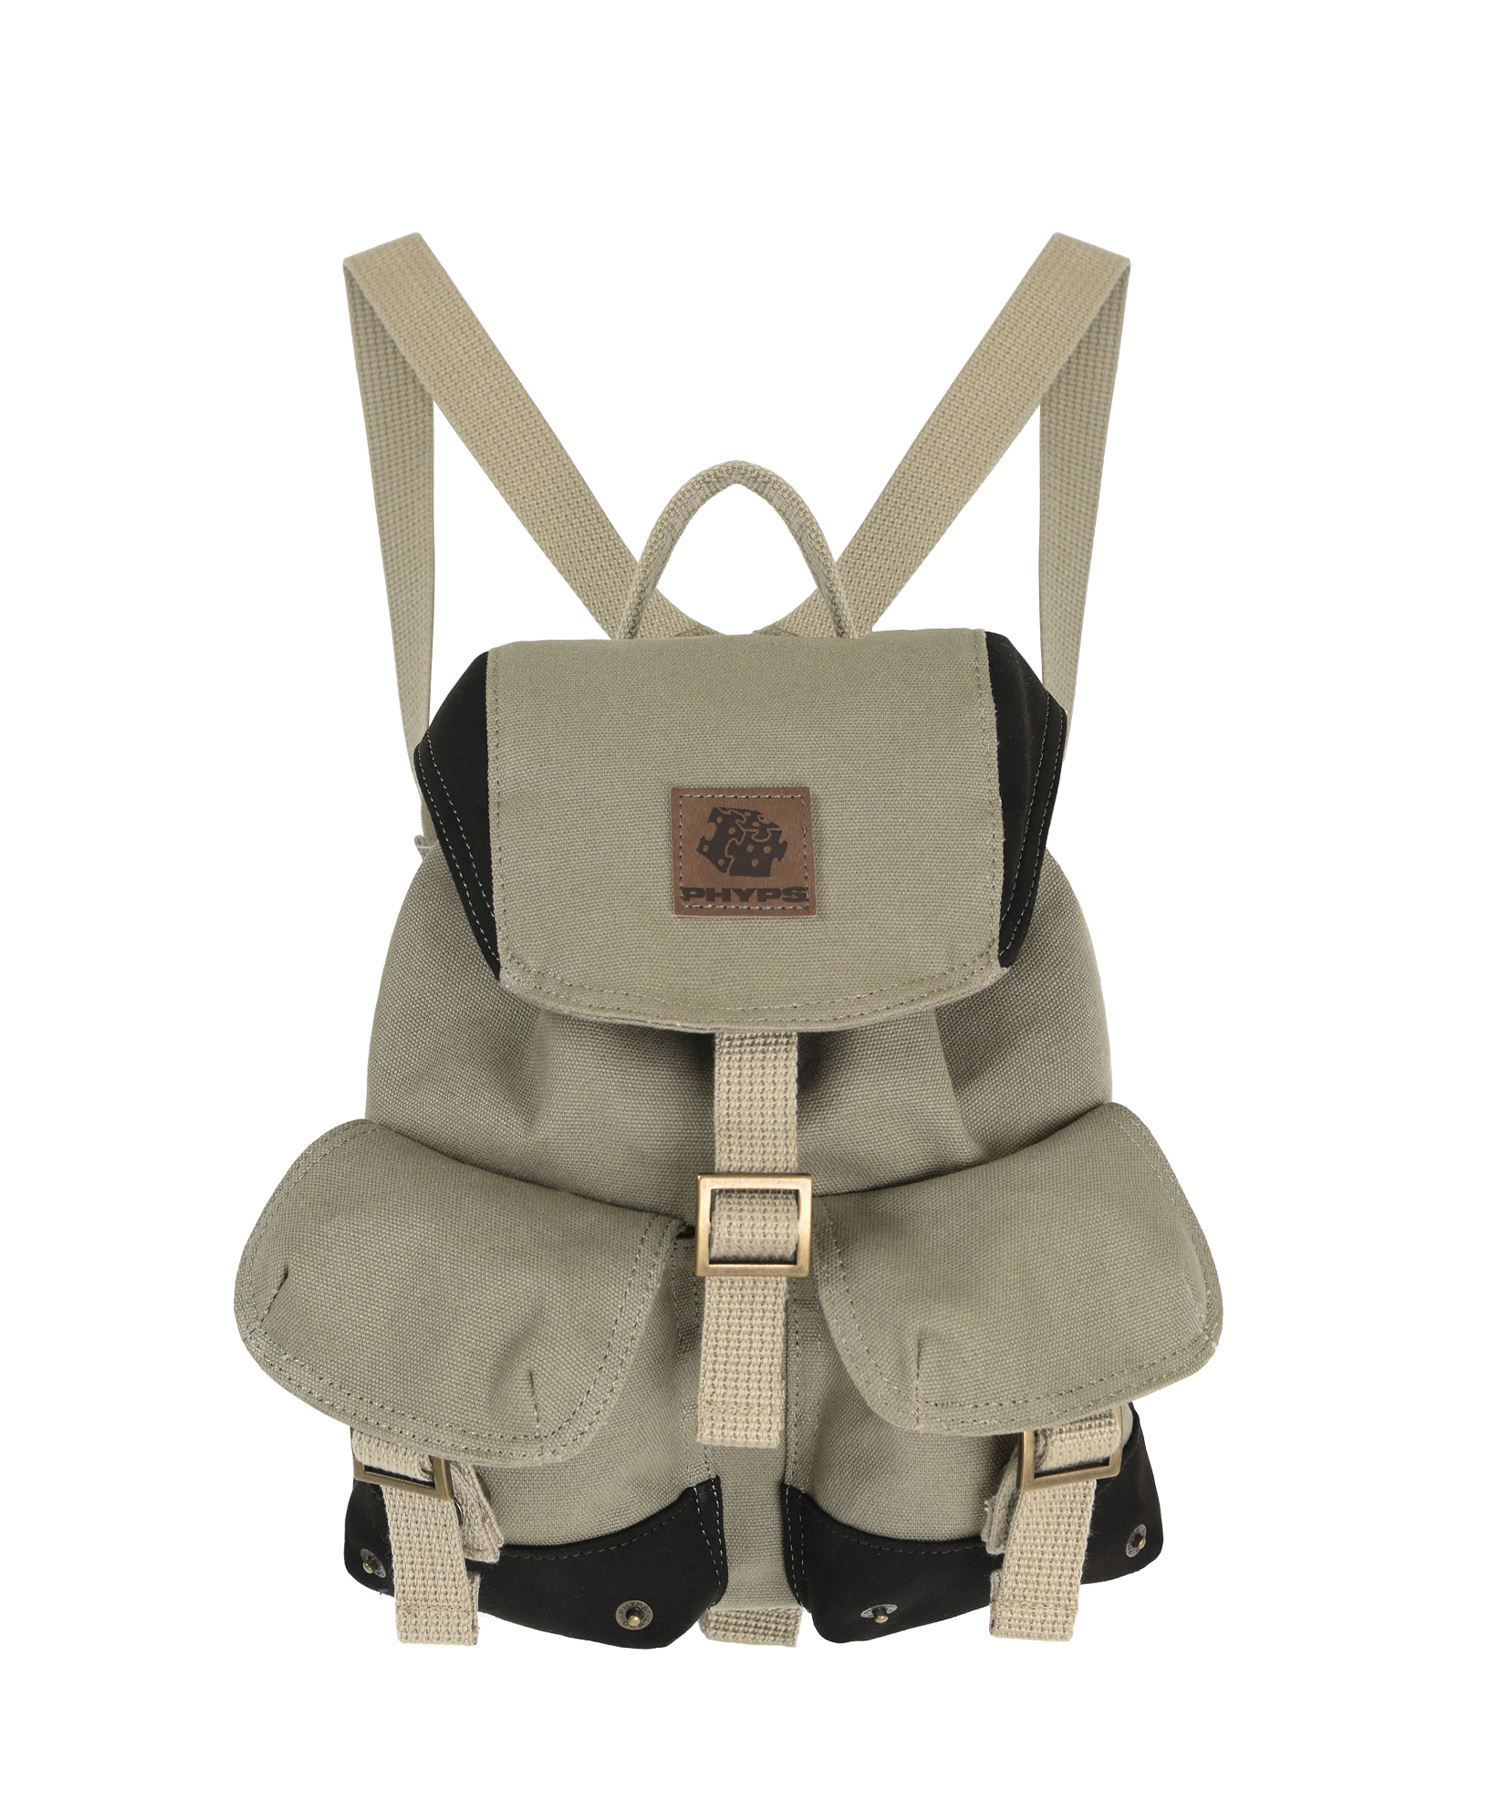 PHYPS® SMALL BUCKLE BACKPACK CANVAS